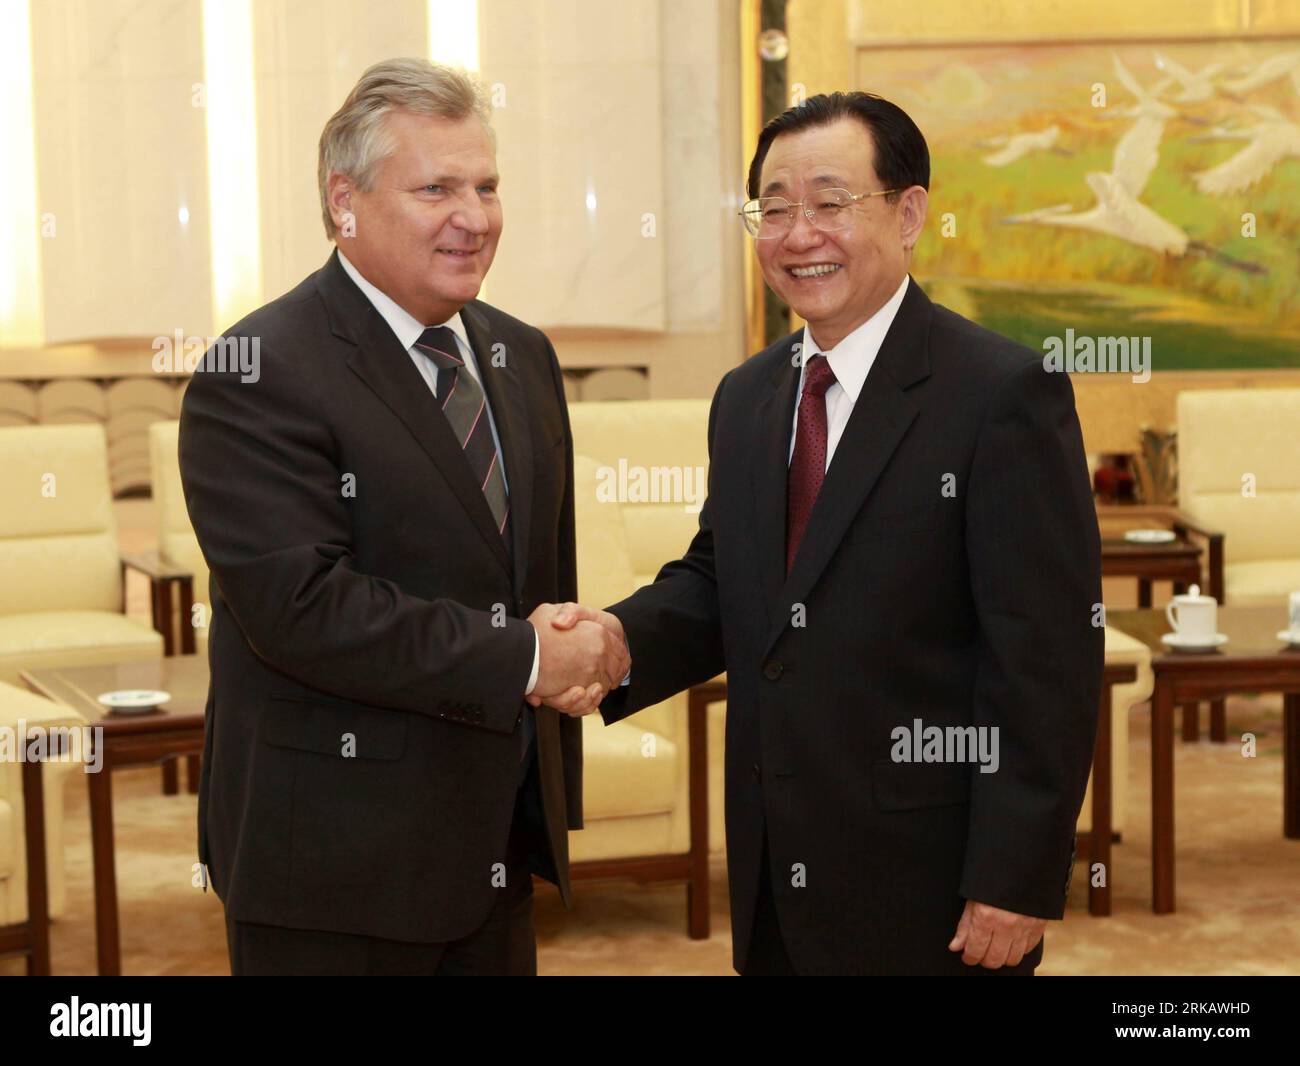 BEIJING, Sept. 15, 2010 Xinhua -- Wang Gang R, vice chairman of the National Committee of the Chinese People s Political Consultative Conference, meets with Former Polish President Aleksander Kwasniewski in Beijing, capital of China, Sept. 15, 2010. Xinhua/Pang Xinglei zgp CHINA-POLAND-WANG GANG-ALEKSANDER KWASNIEWSKI-MEETING CN PUBLICATIONxNOTxINxCHN Stock Photo